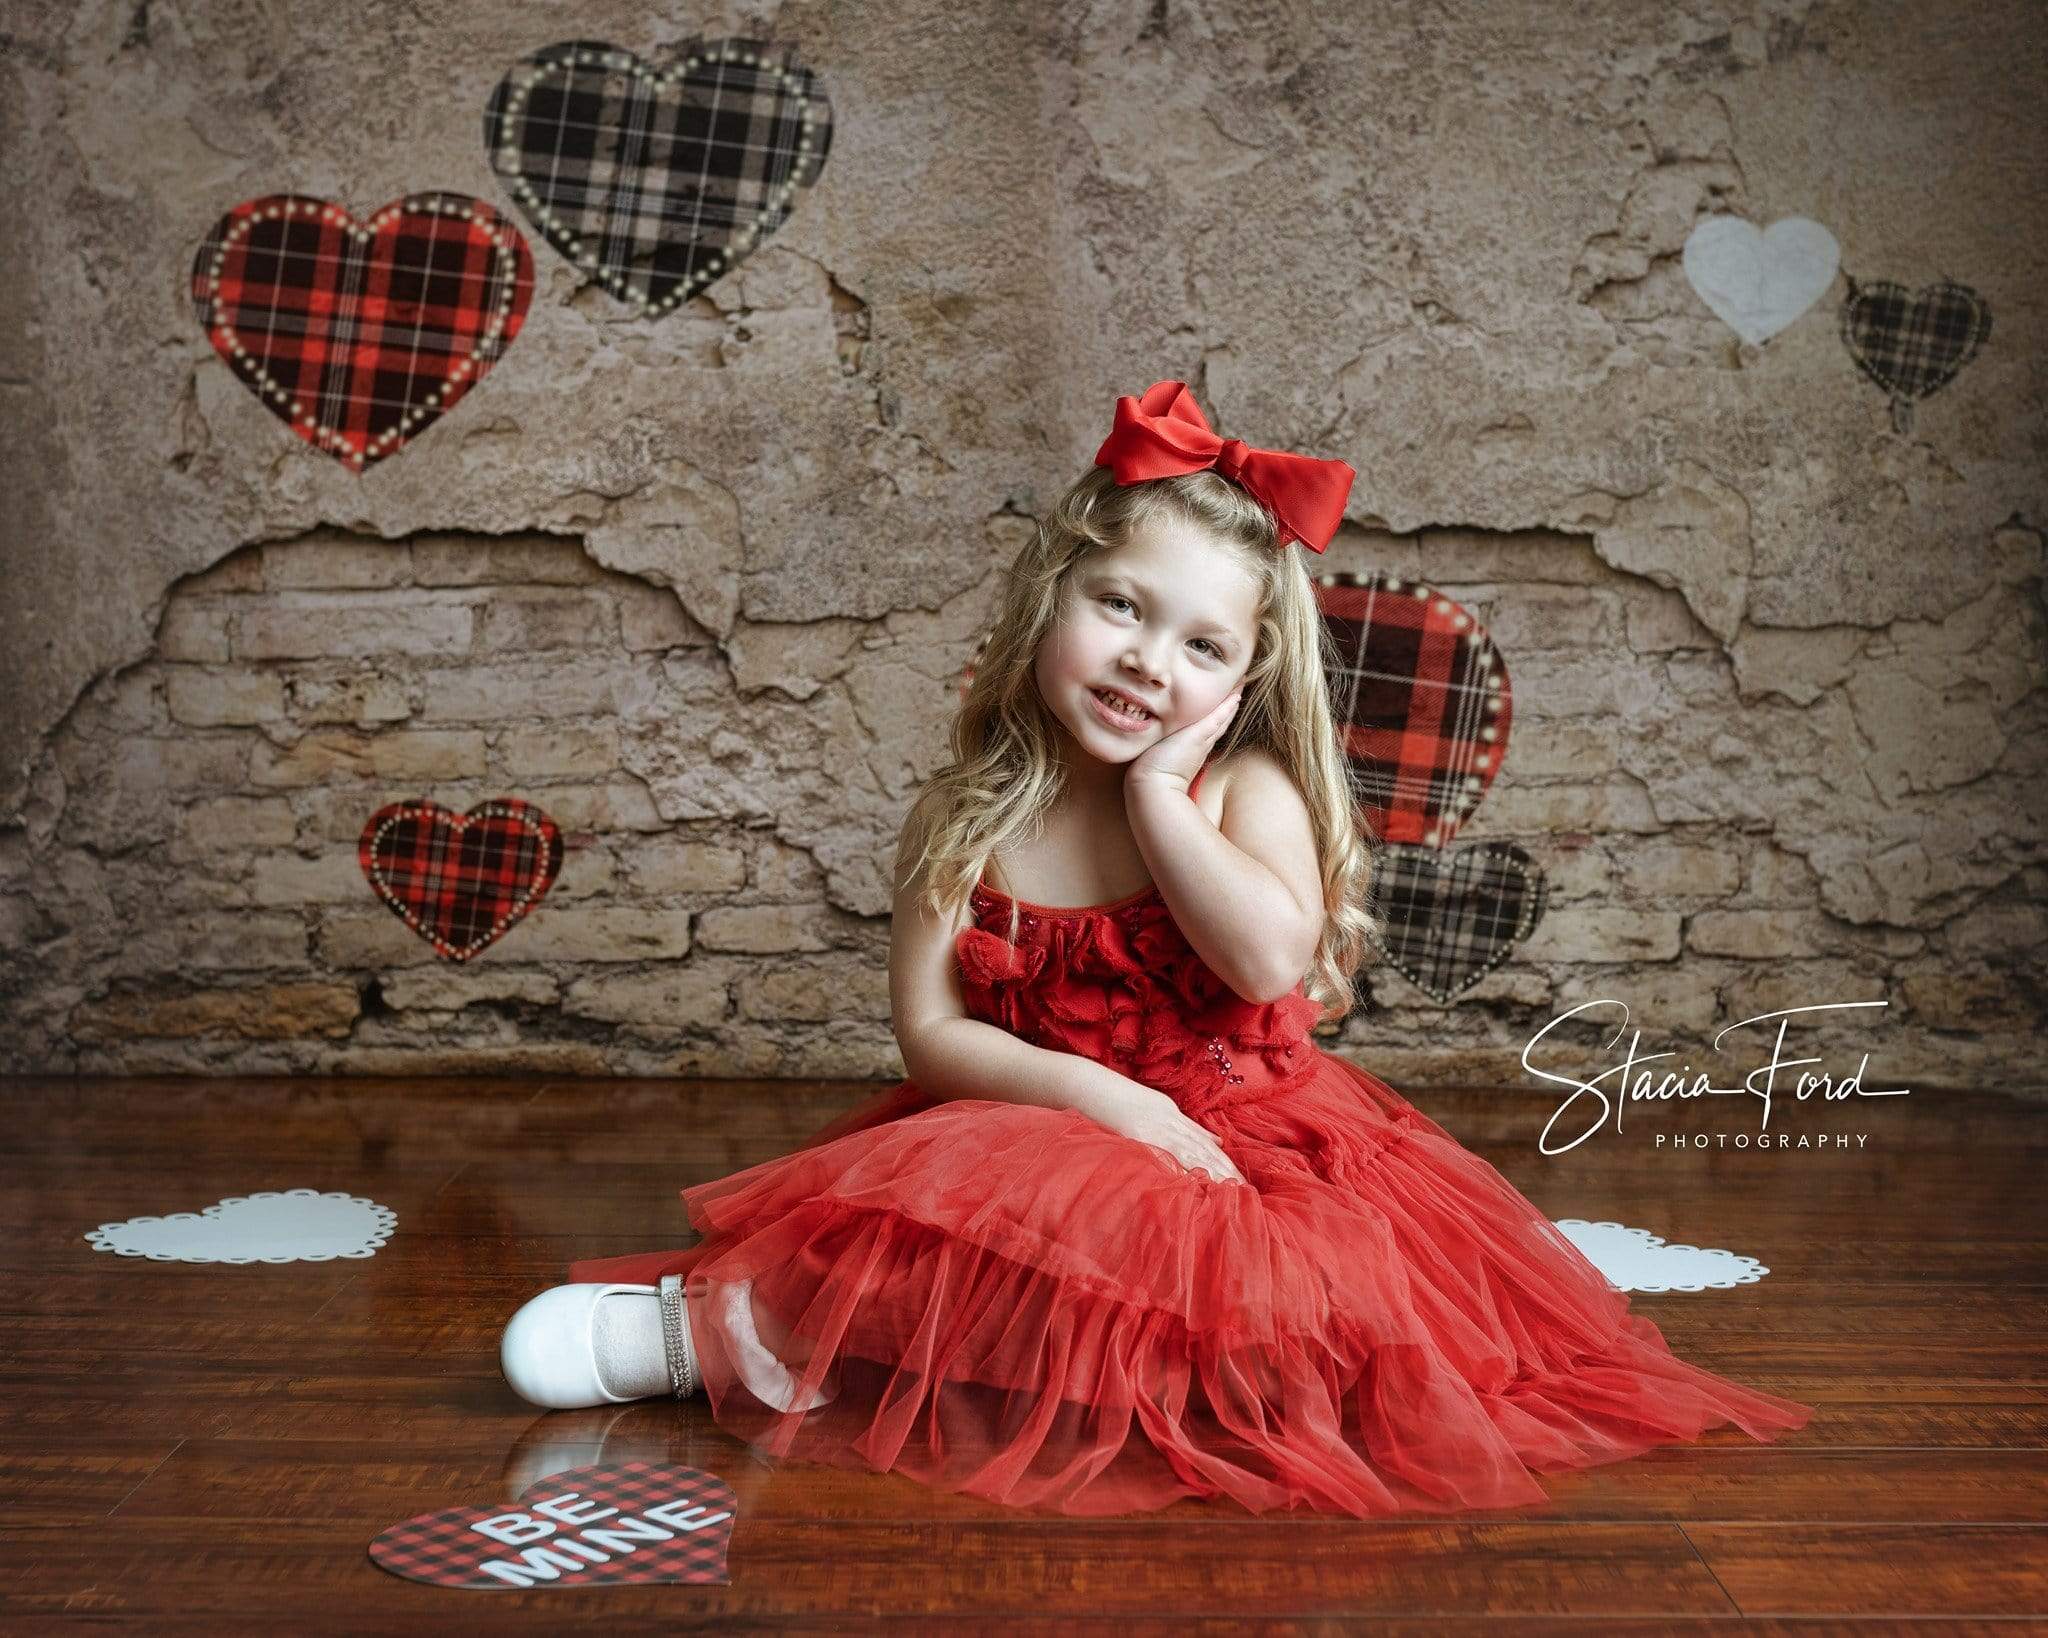 Kate Valentine's Day Love Heart Damaged Wall Backdrop for Photography Designed by JFCC